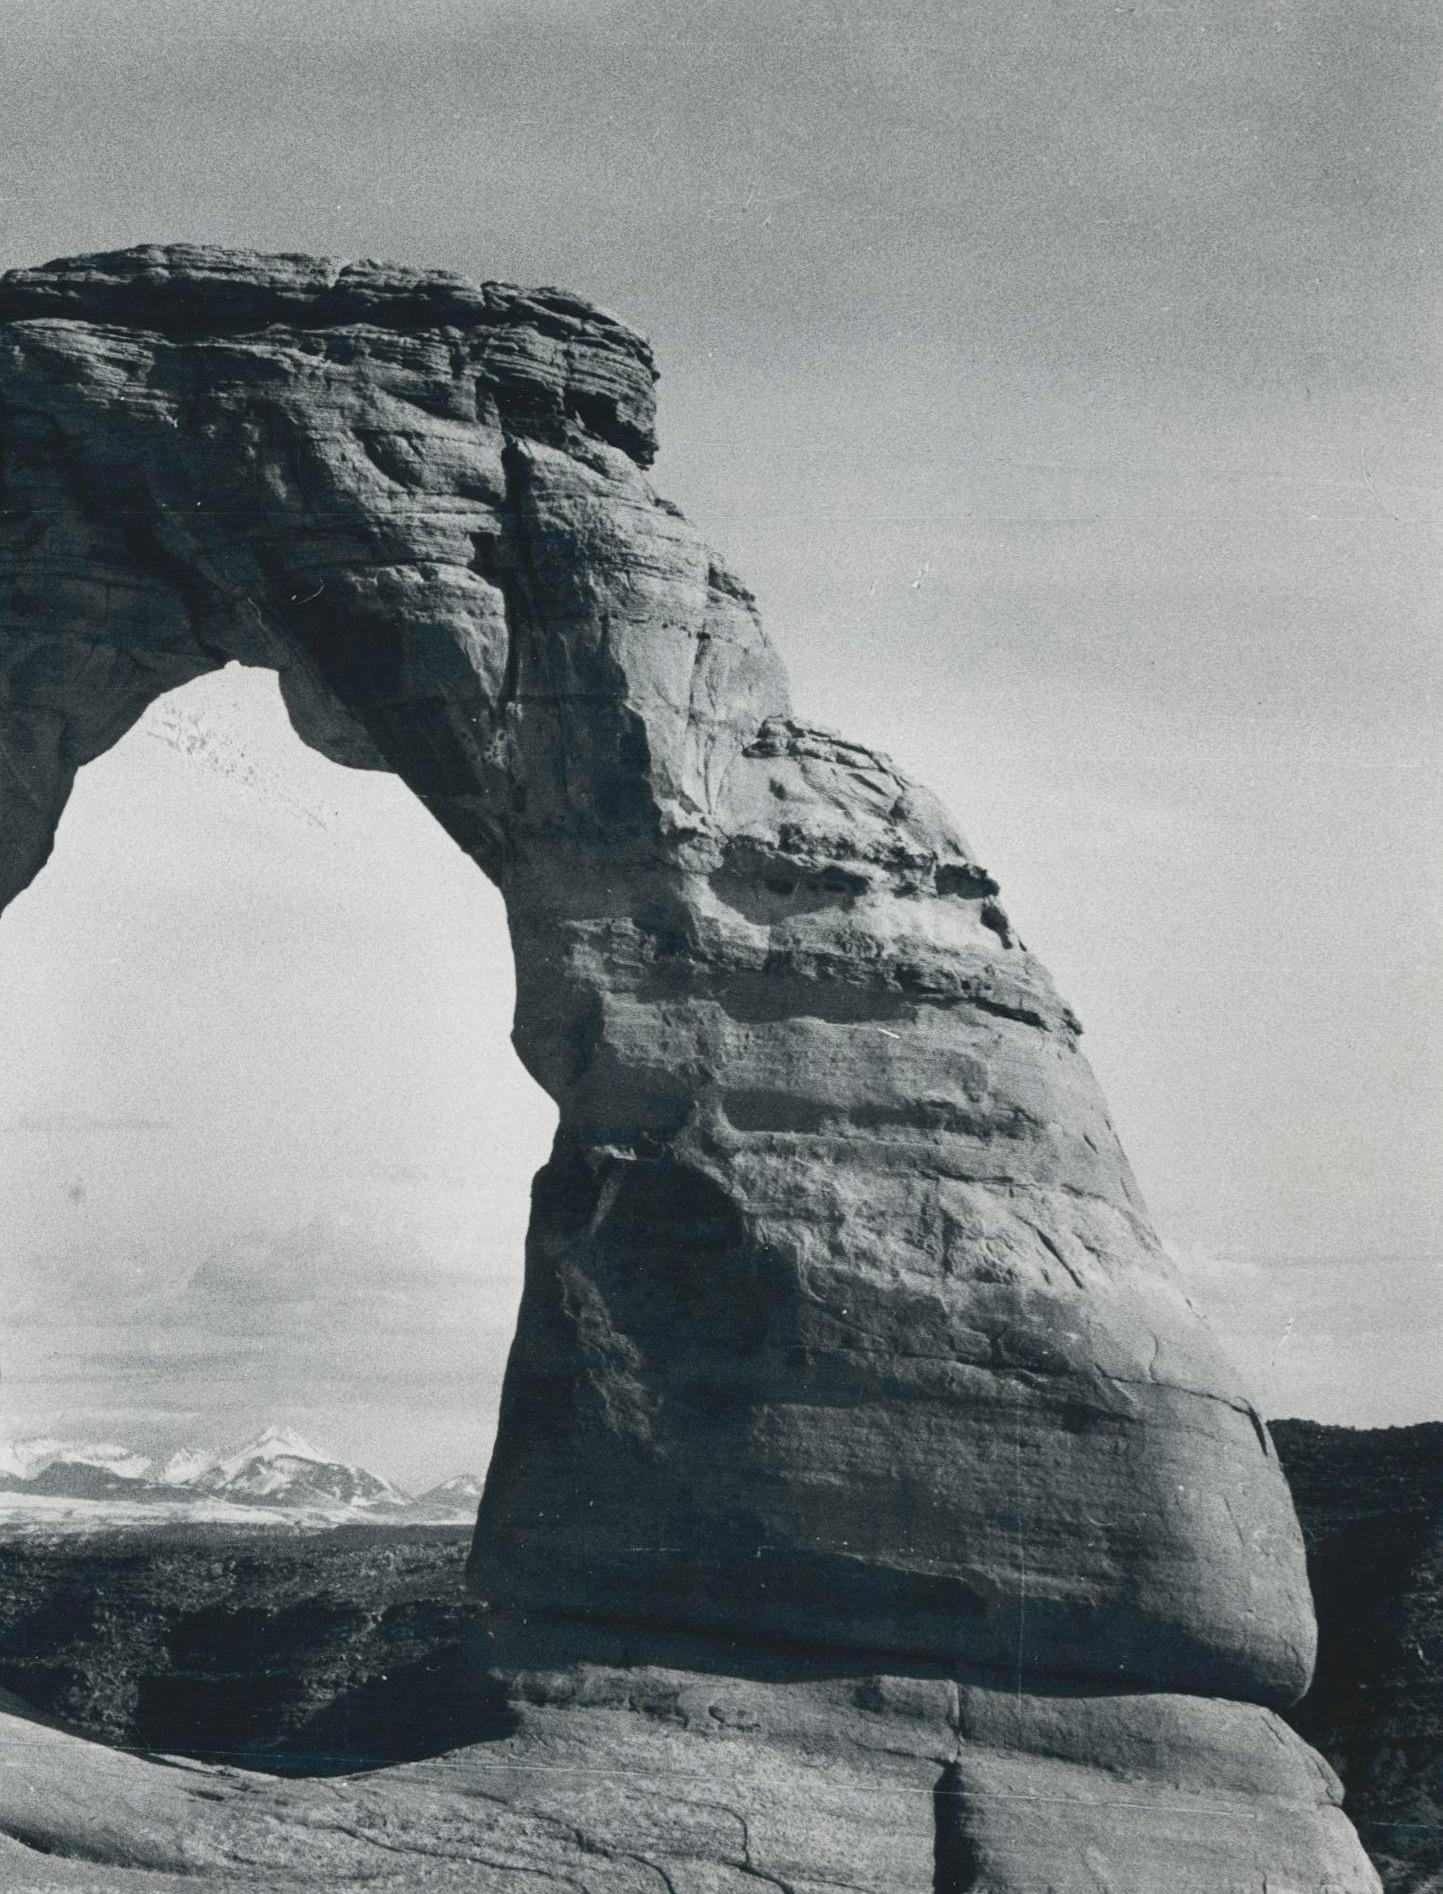 Arches Nationalpark, Utah, Black and White, USA 1960s, 17, 3 x 23, 3 cm - Modern Photograph by Erich Andres